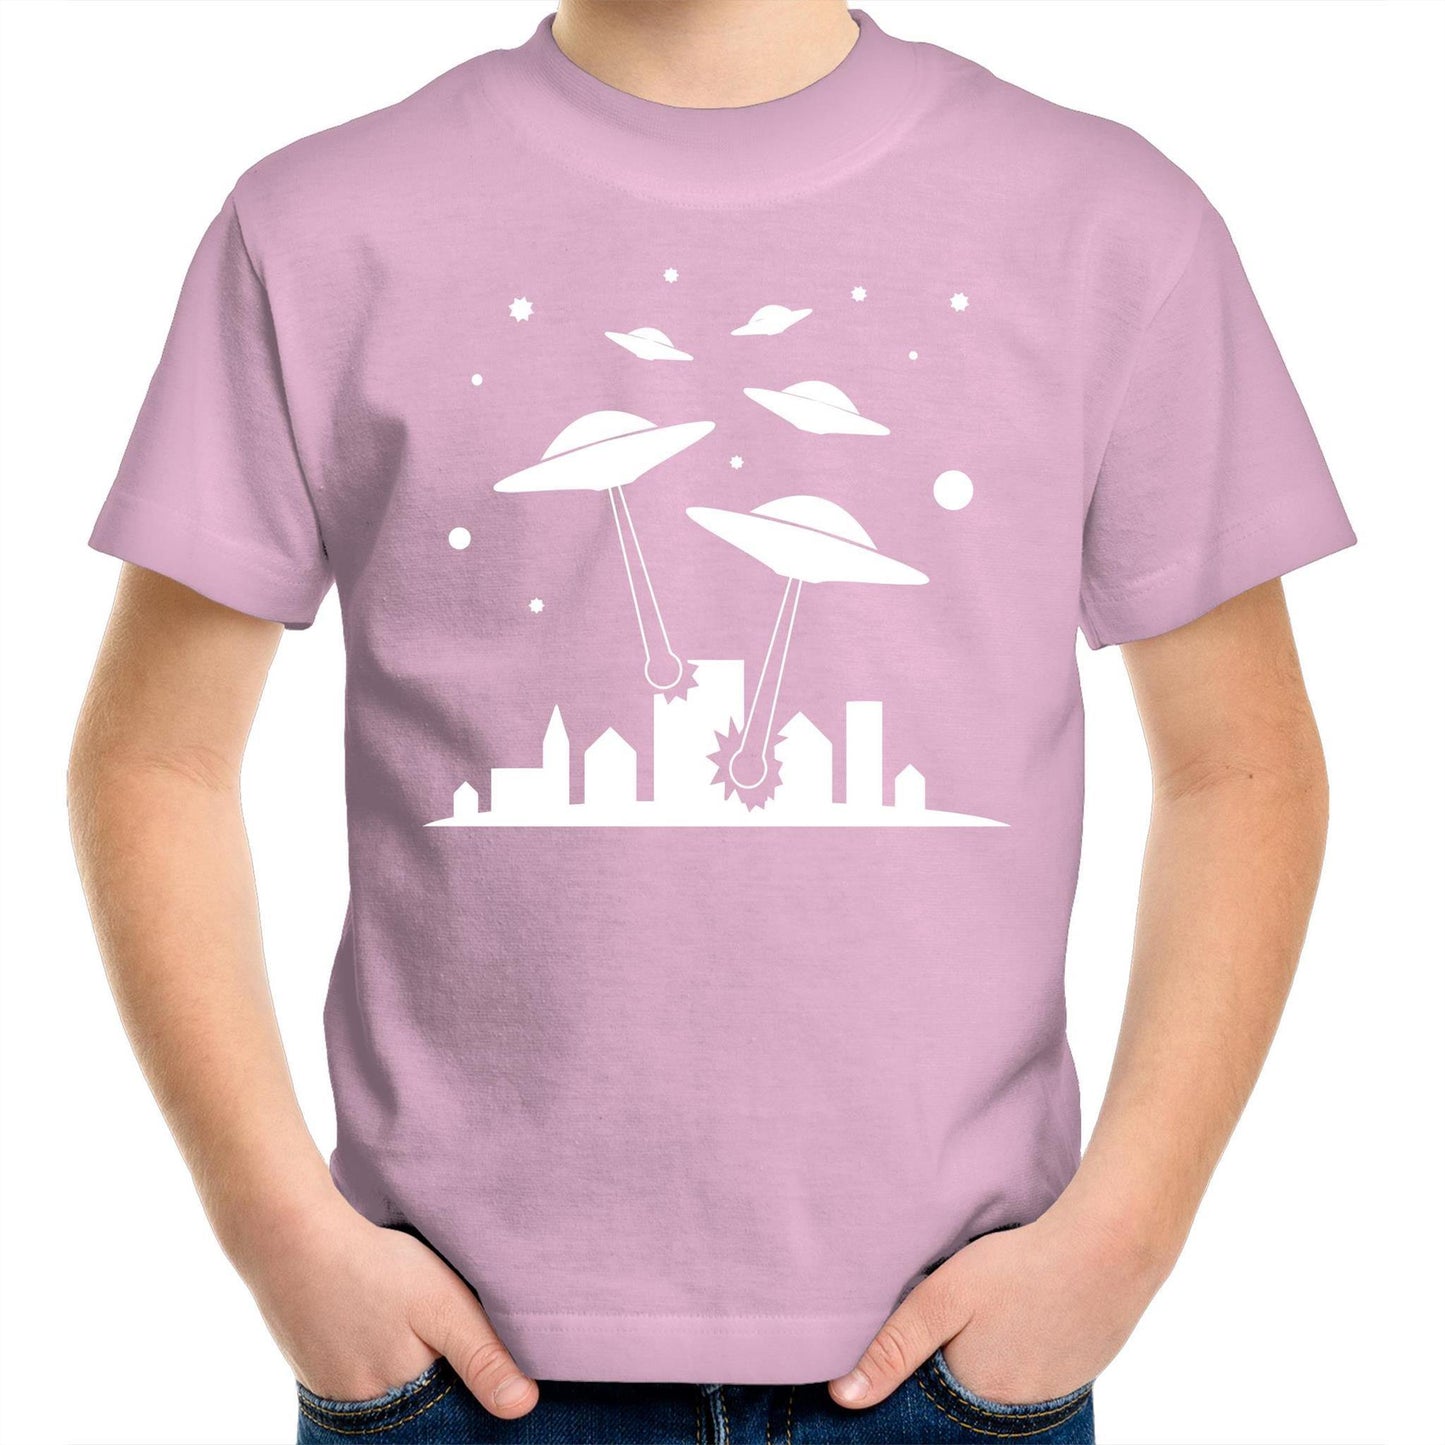 Space Invasion - Kids Youth Crew T-Shirt Pink Kids Youth T-shirt